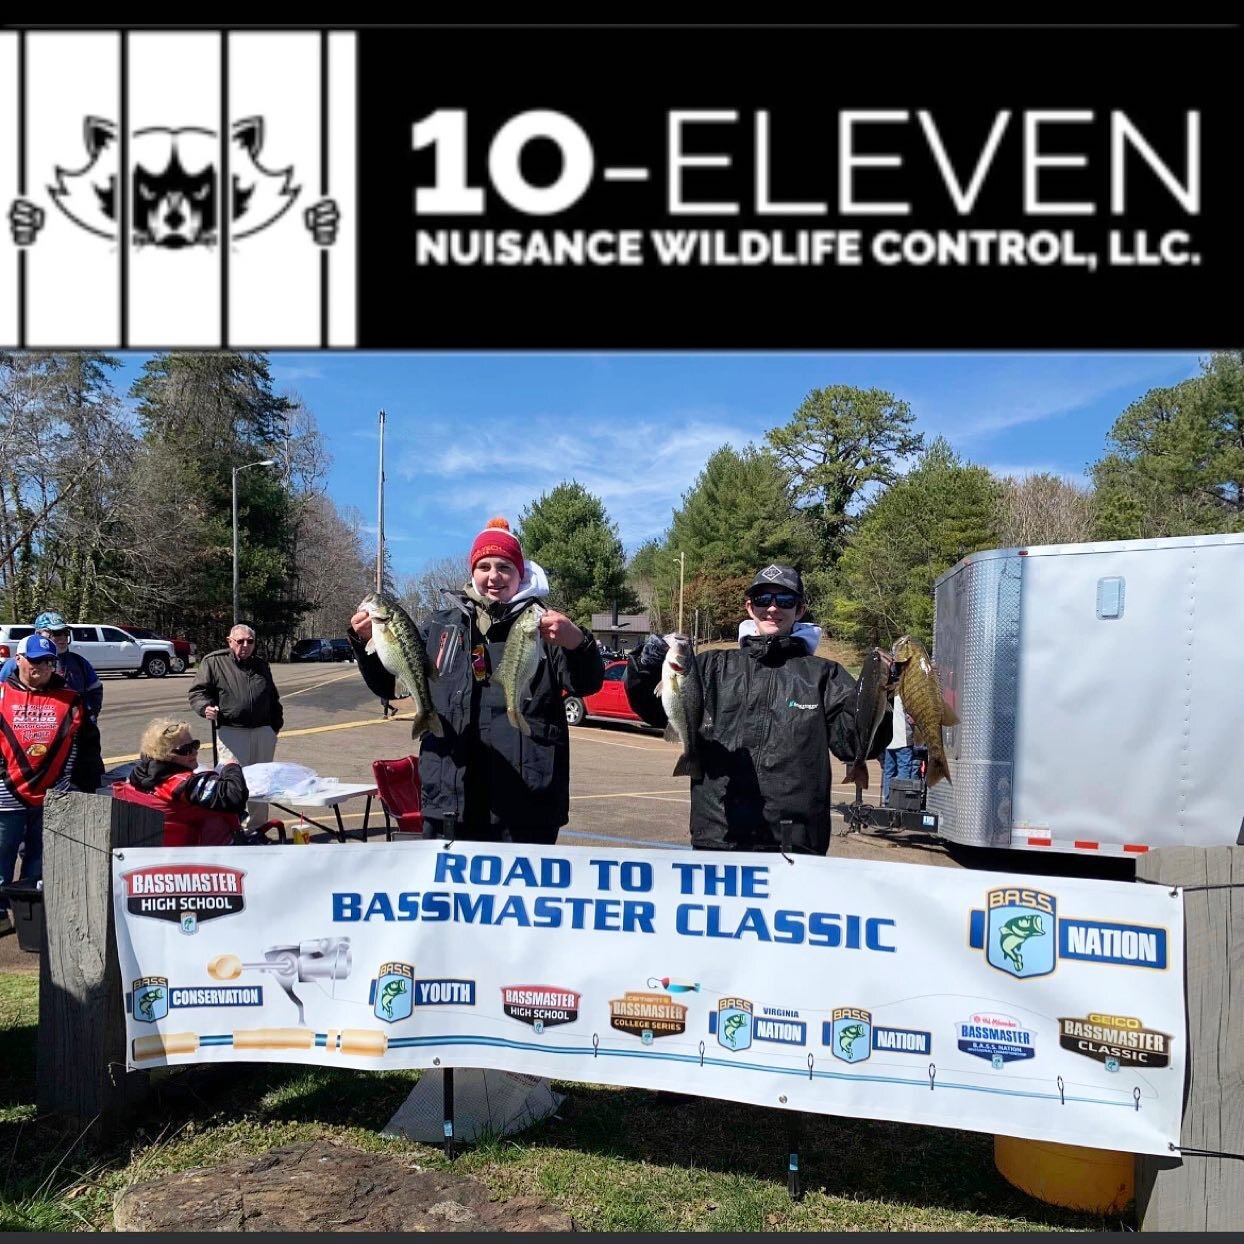 10-Eleven is proud to sponsor the Radford Youth Fishing Team.  We want to wish Gavin and Nathan the best of luck in the upcoming State Championship tournament at Lake Gaston on April 29th!  Catch the big ones guys! 🚤🎣🏆.